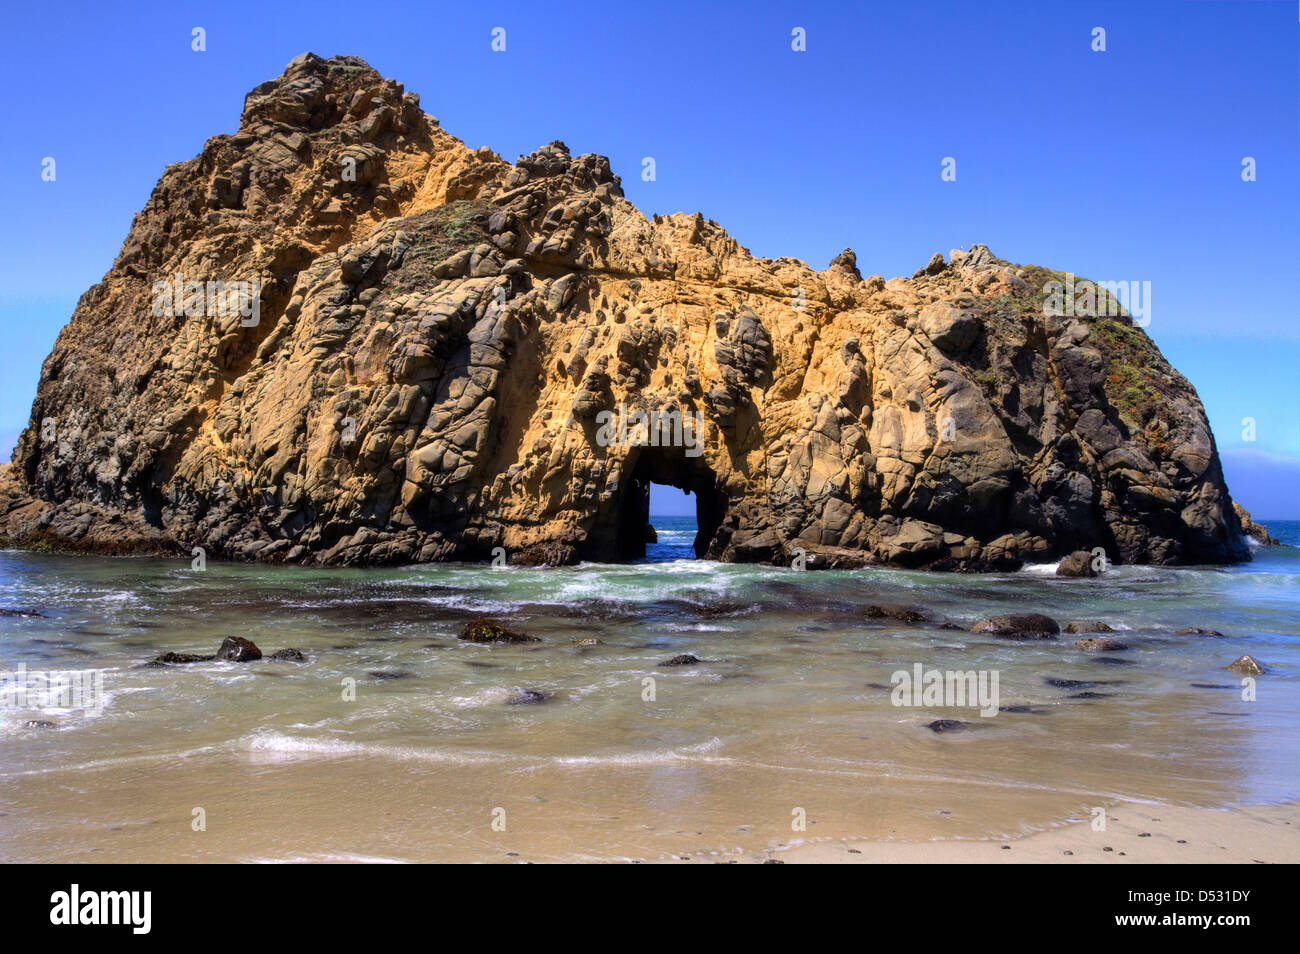 Offshore stack with an arch at Pfeiffer Beach in the Julia Pfeiffer Big Sur State Park, California, USA in January Stock Photo